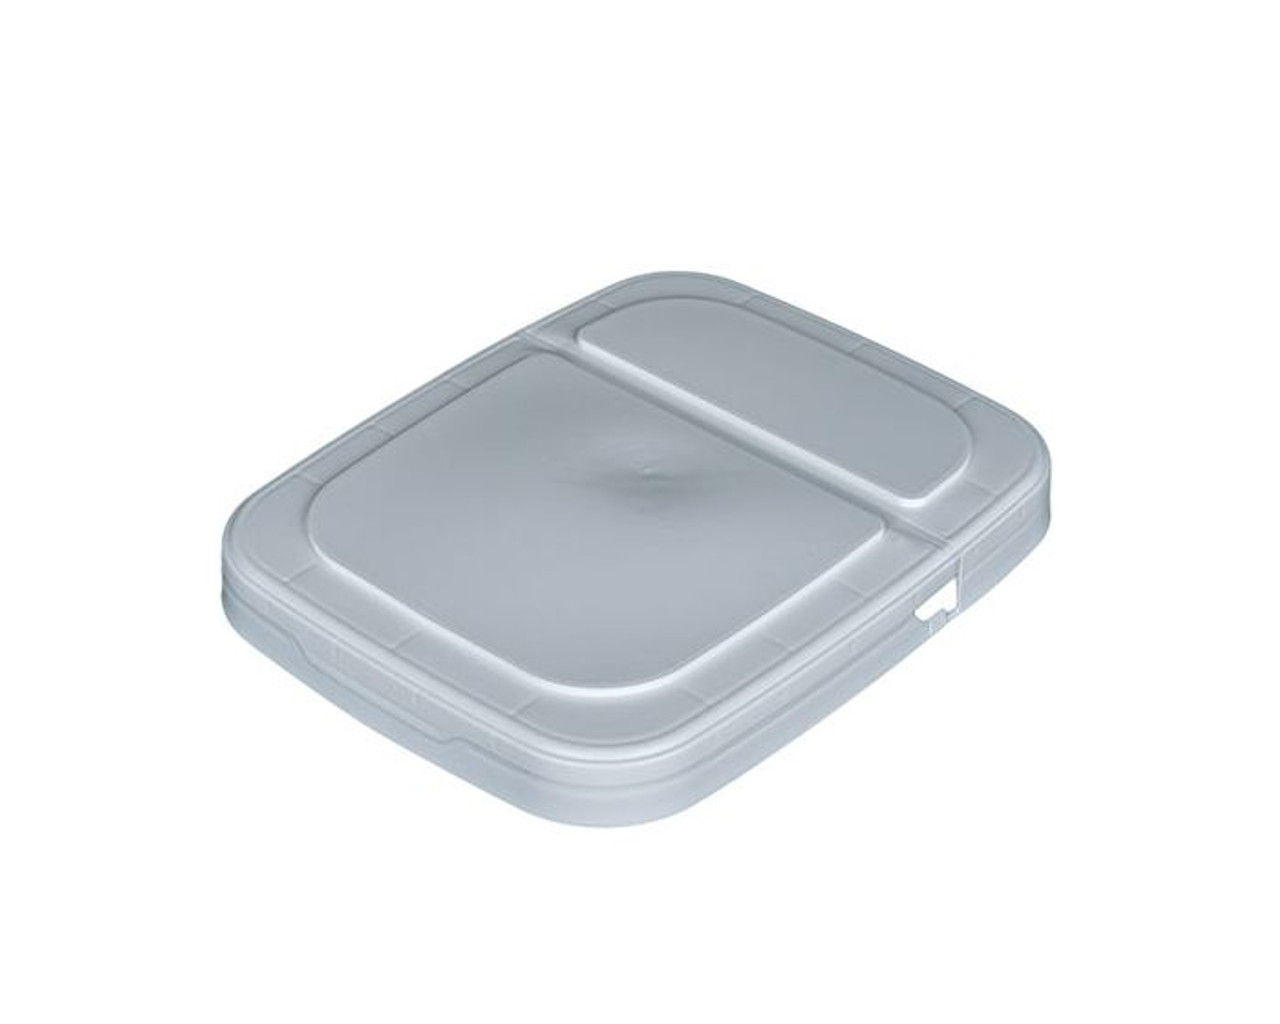 1 Gallon EZ Stor® Plastic Container Hinged Lid